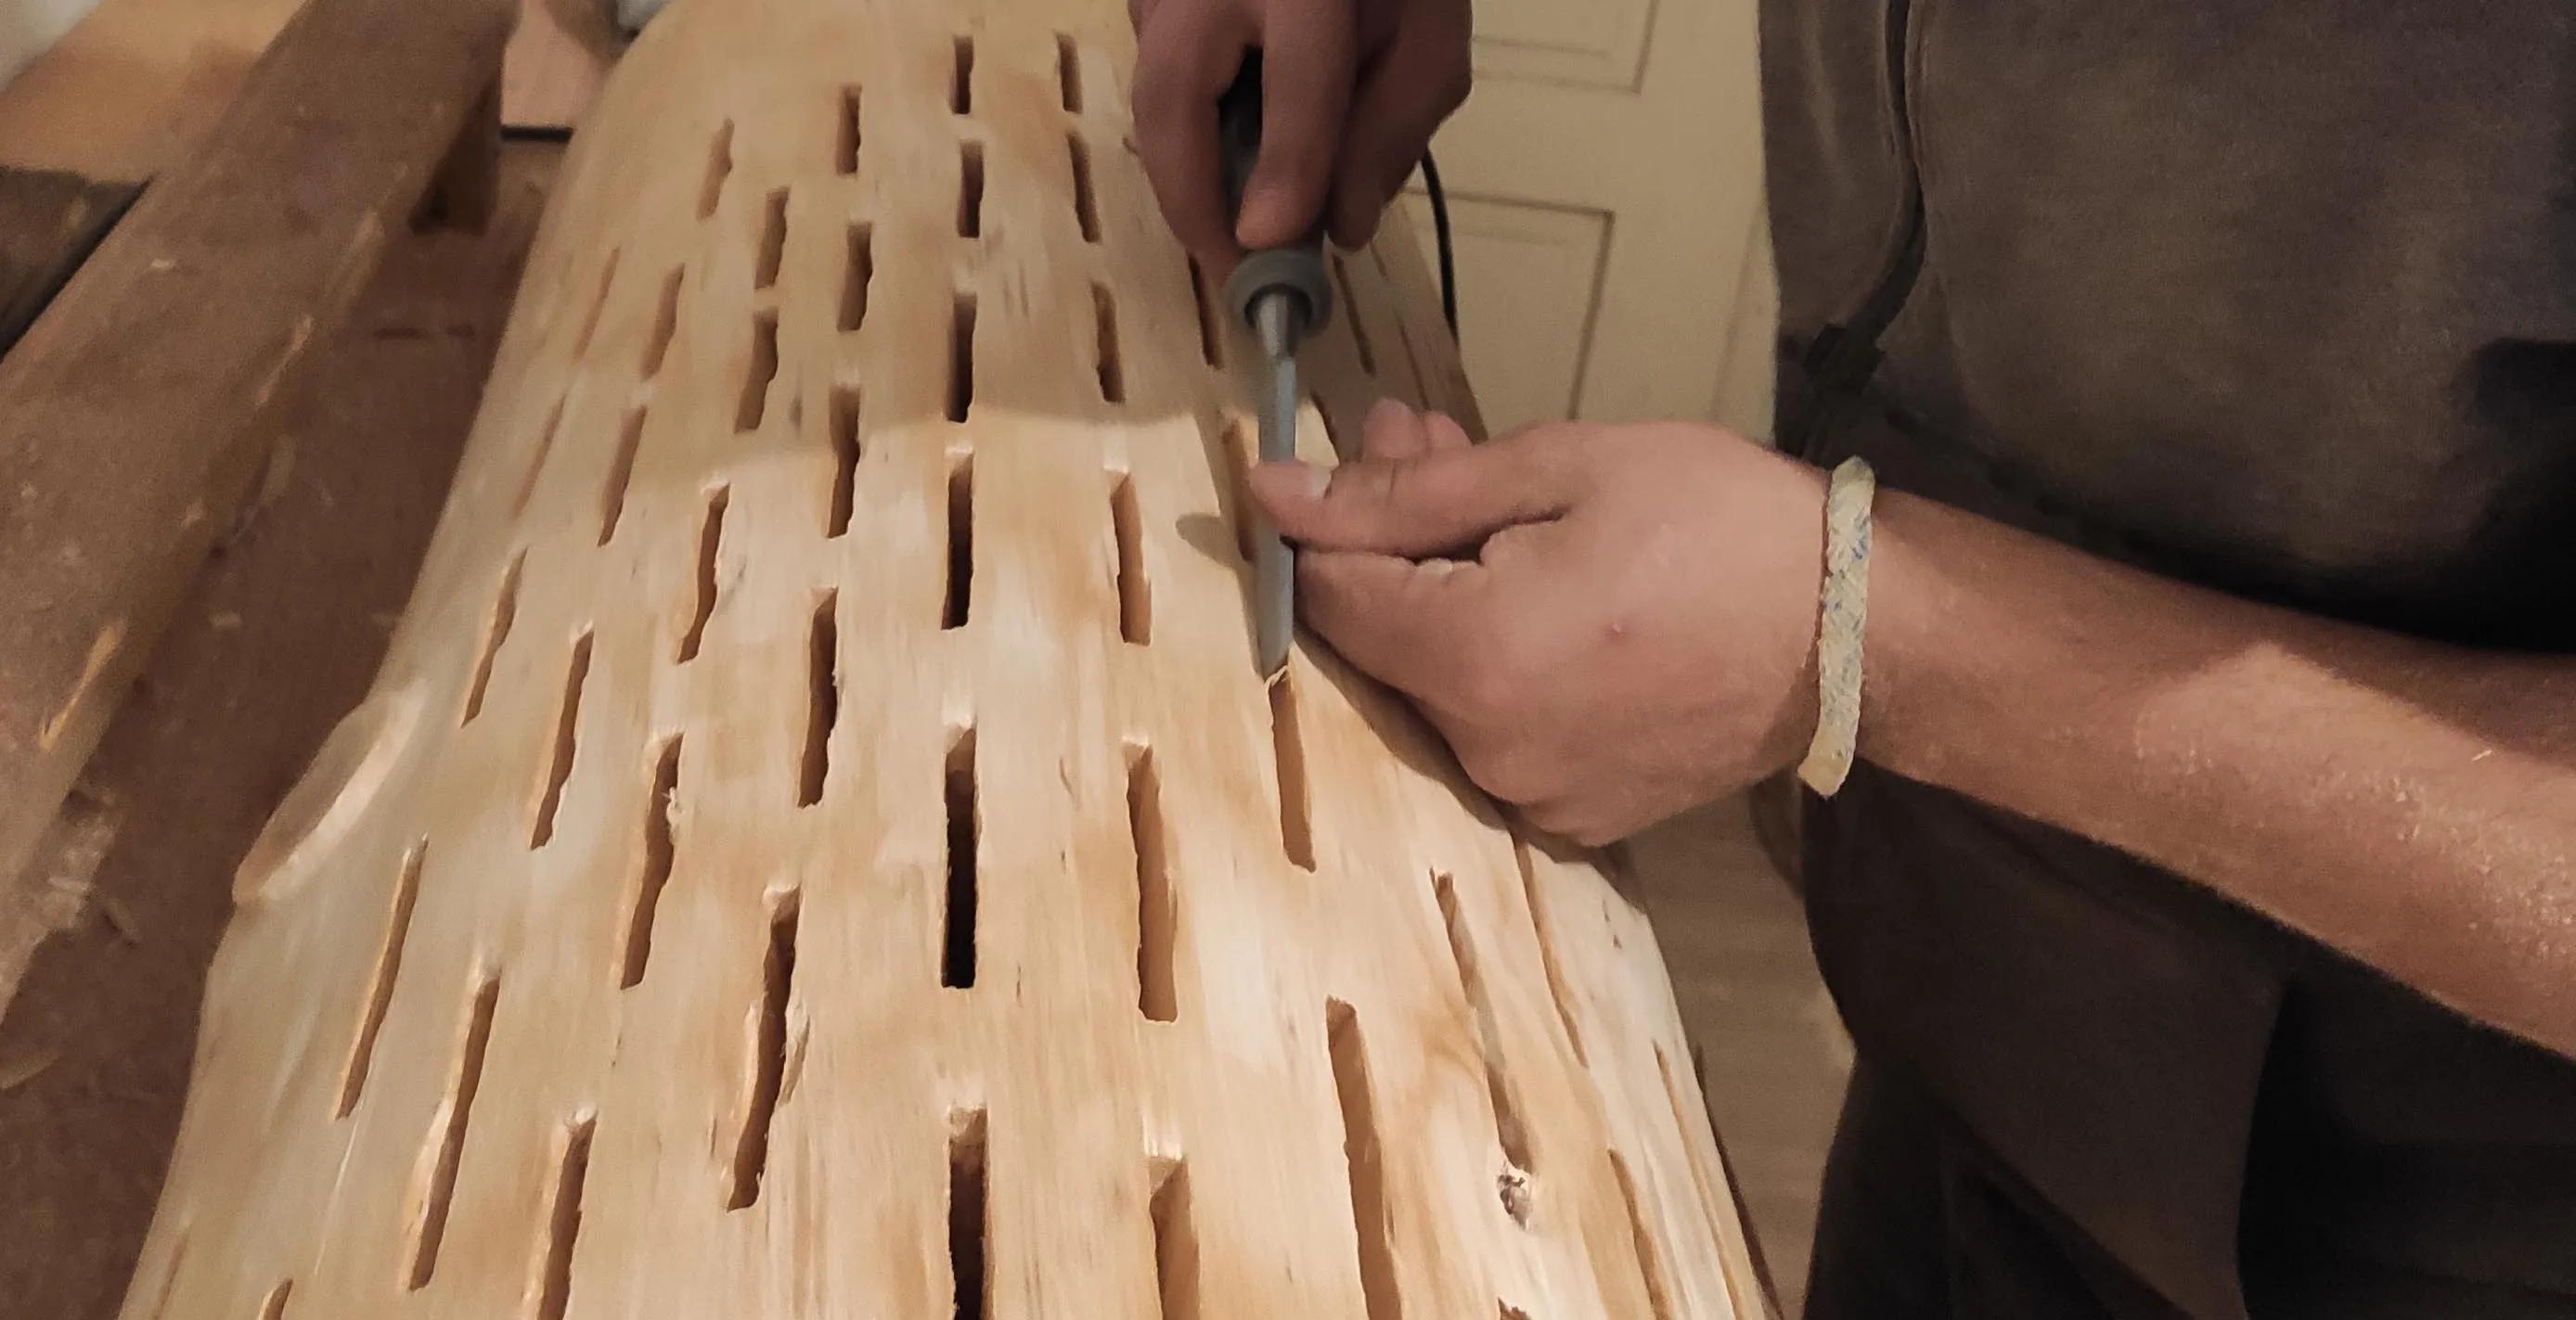 Woodwork by hand